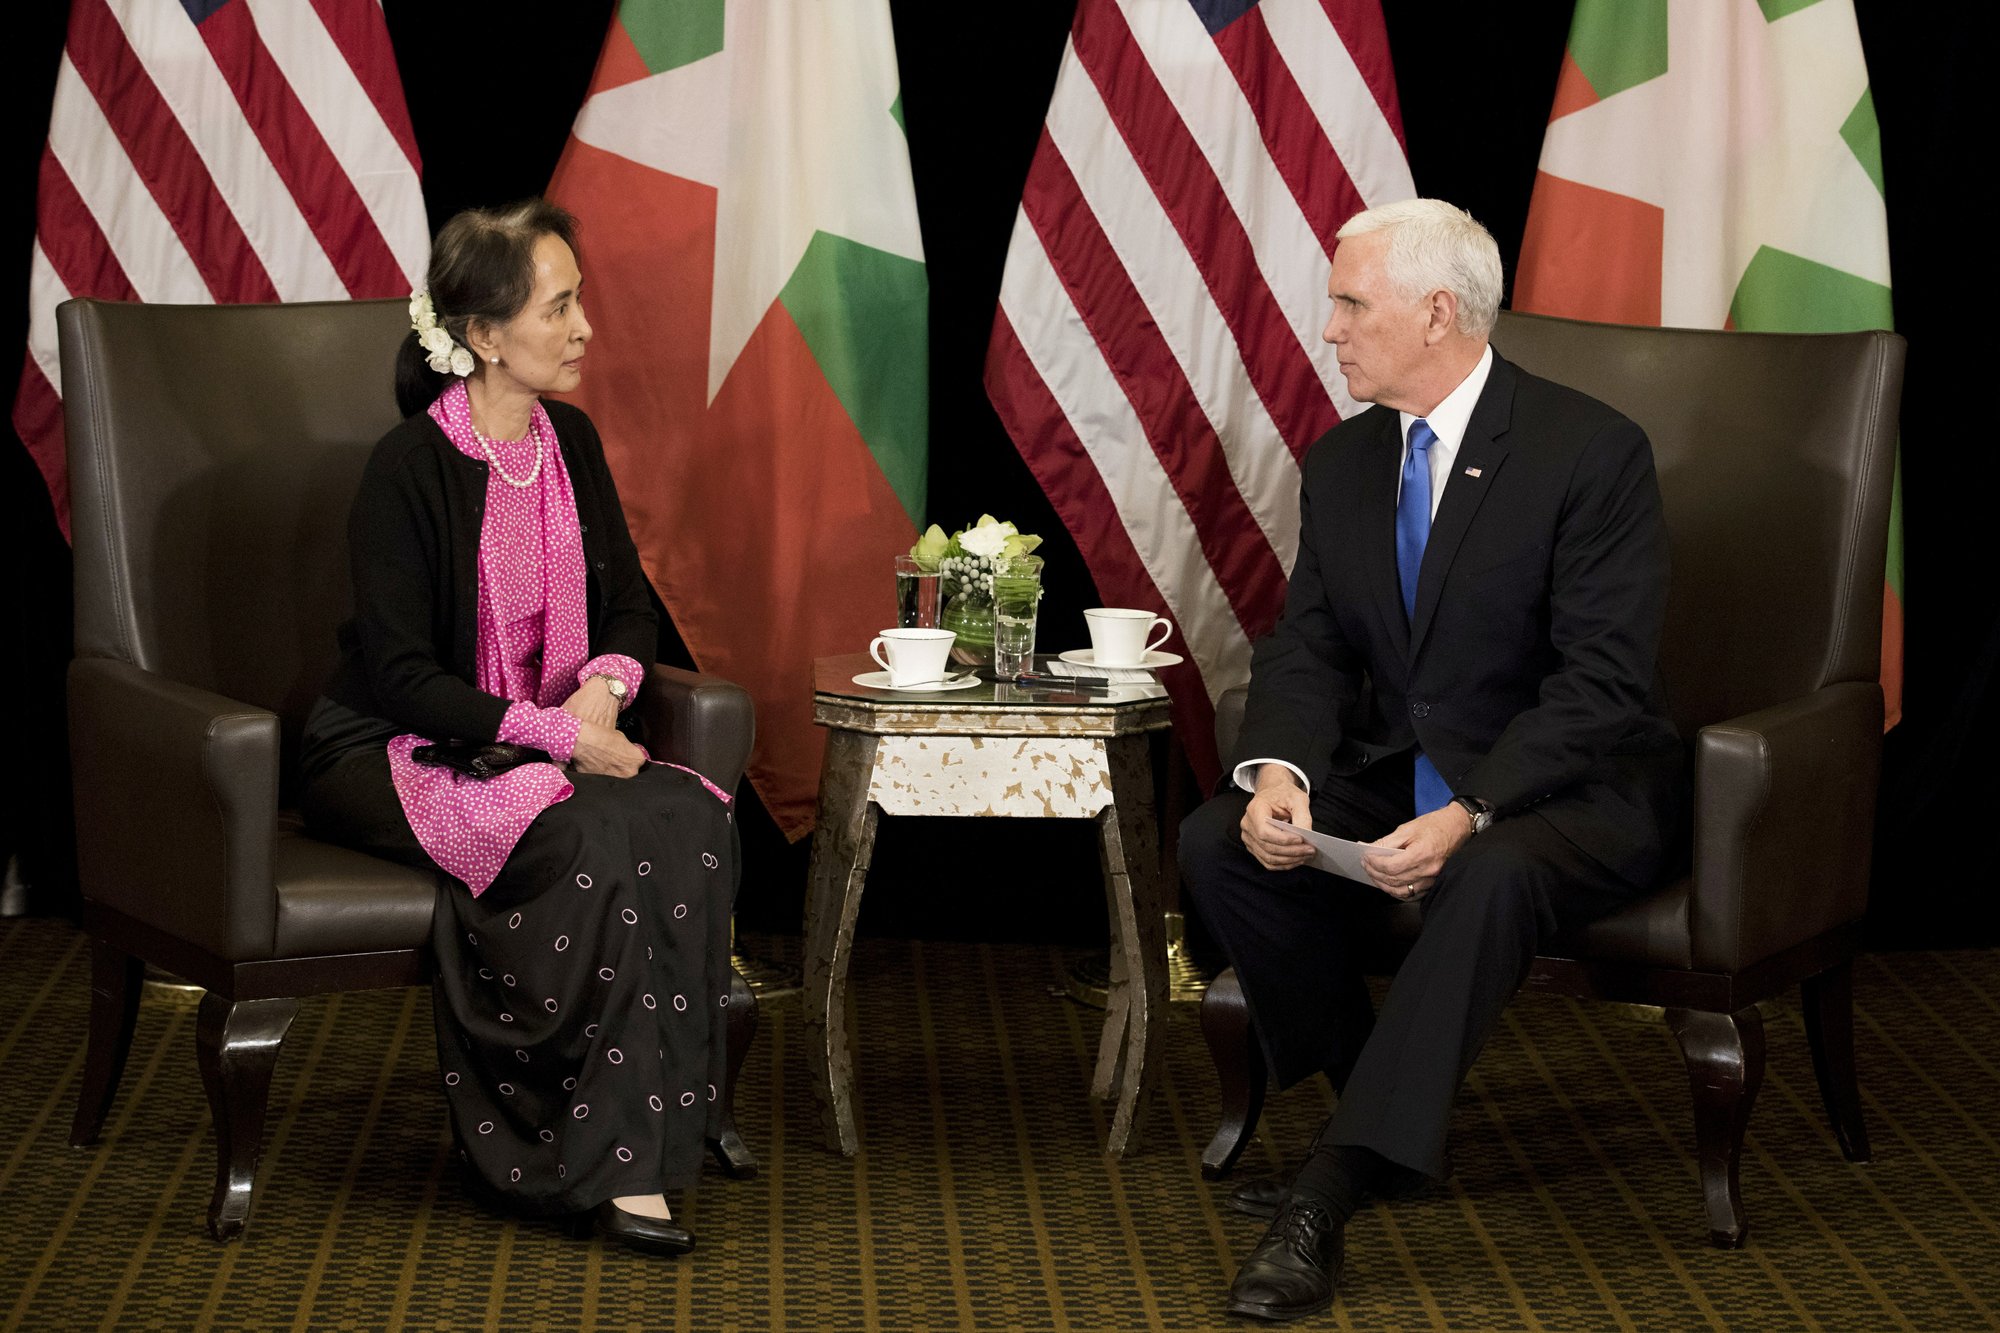 Pence says Myanmar’s handling of Rohingya ‘without excuse’